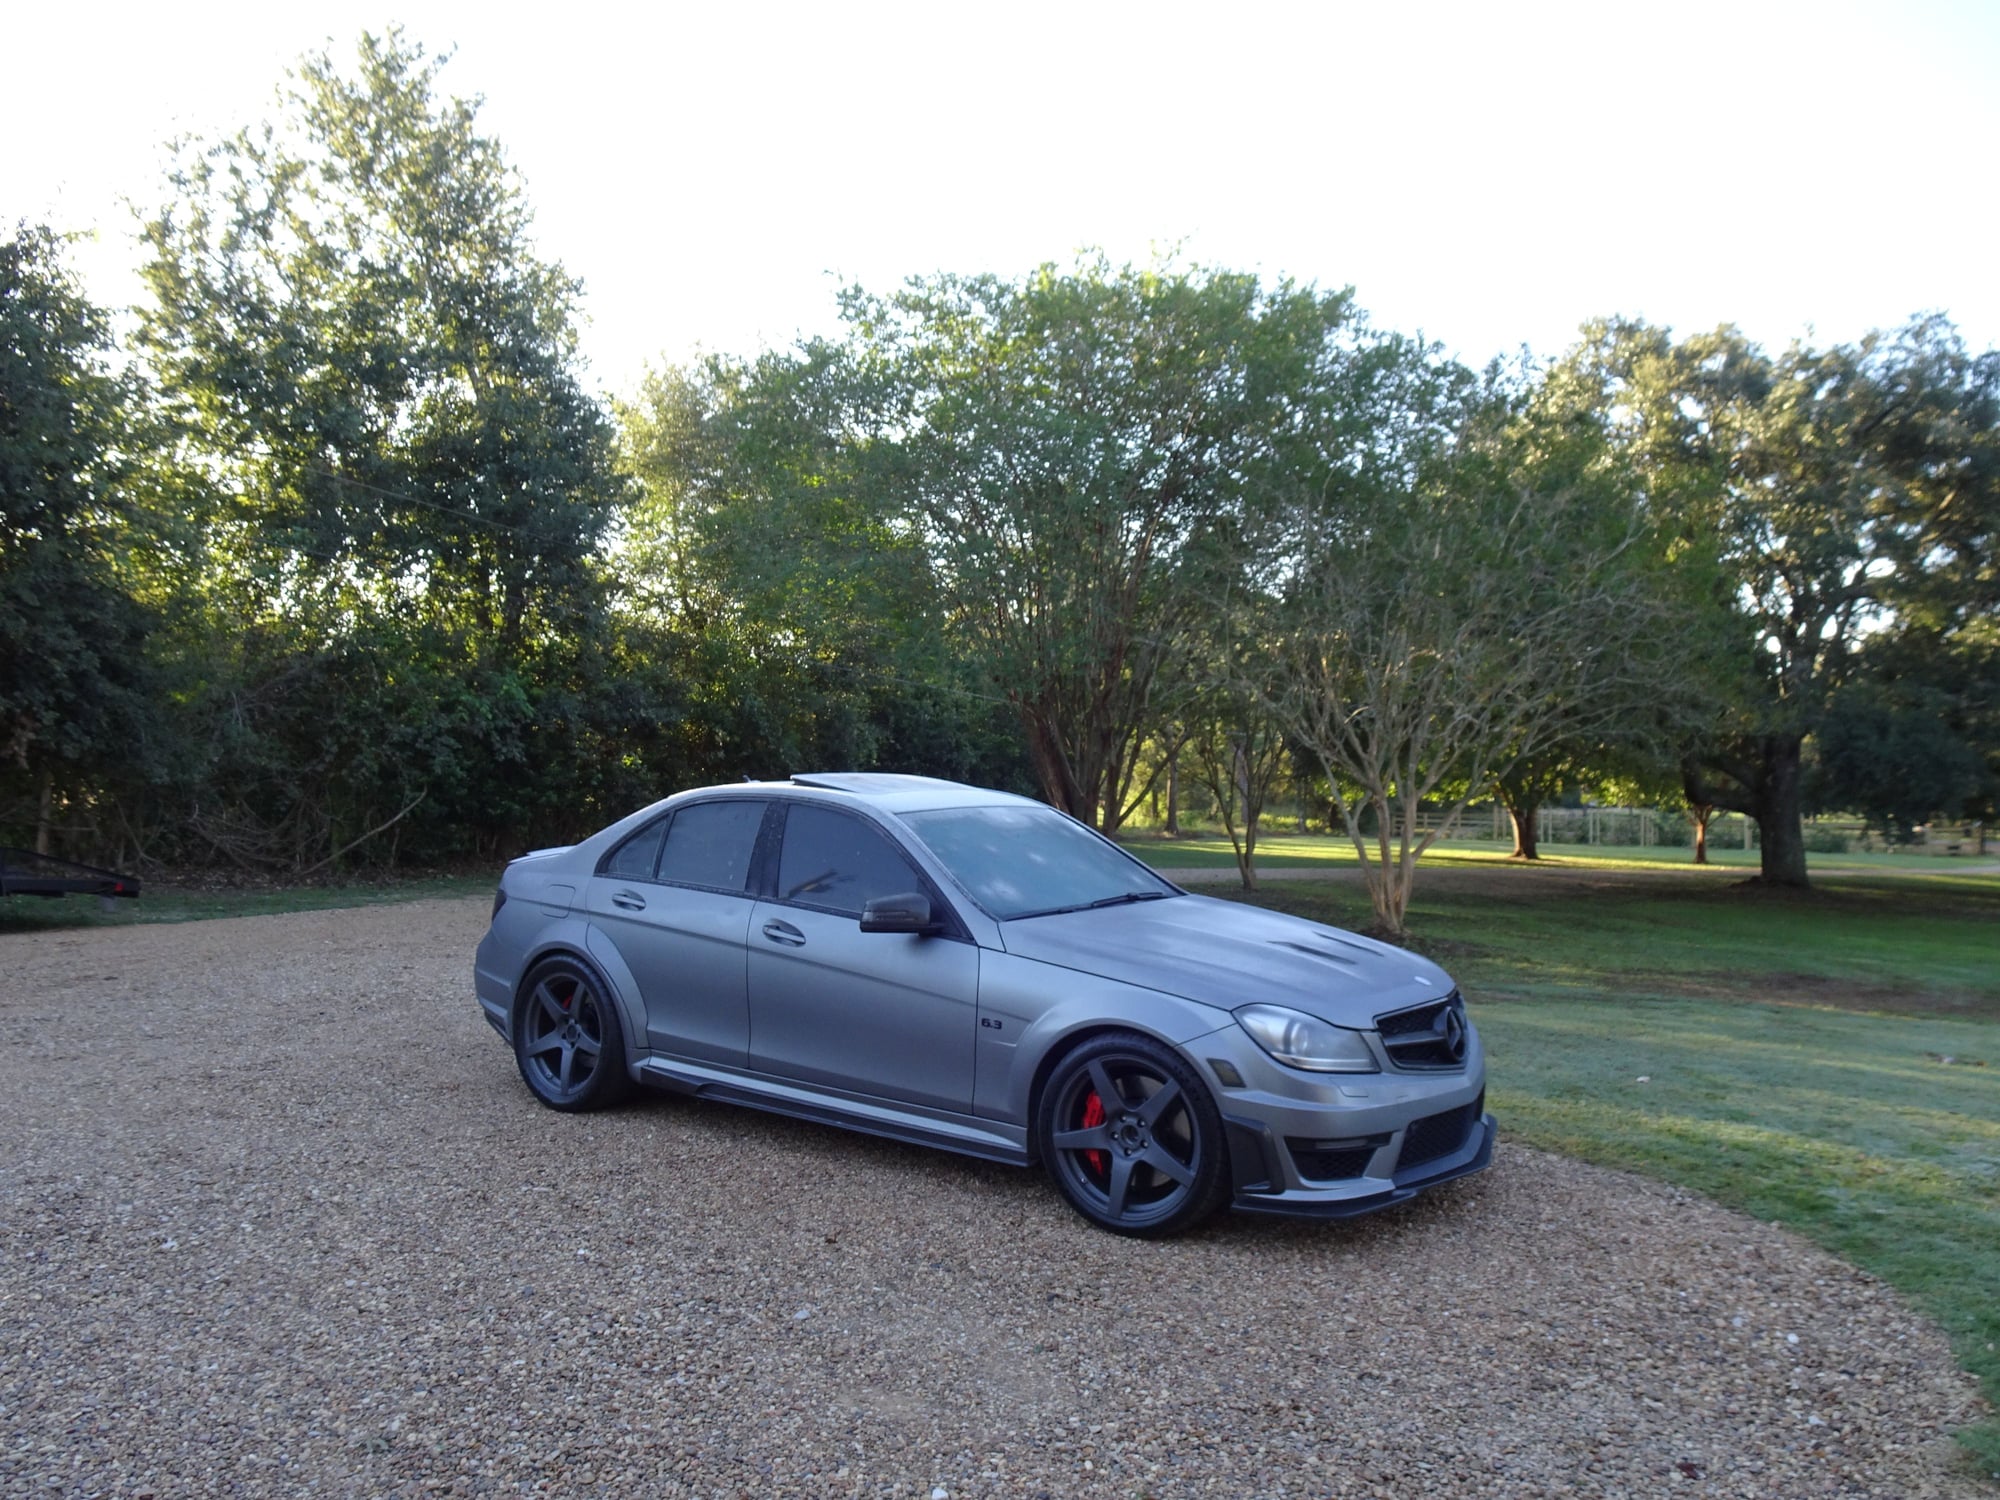 14 C63 507 Sedan Highly Unique And Fully Built One Of 23 Sedans In Magno Matte Mbworld Org Forums